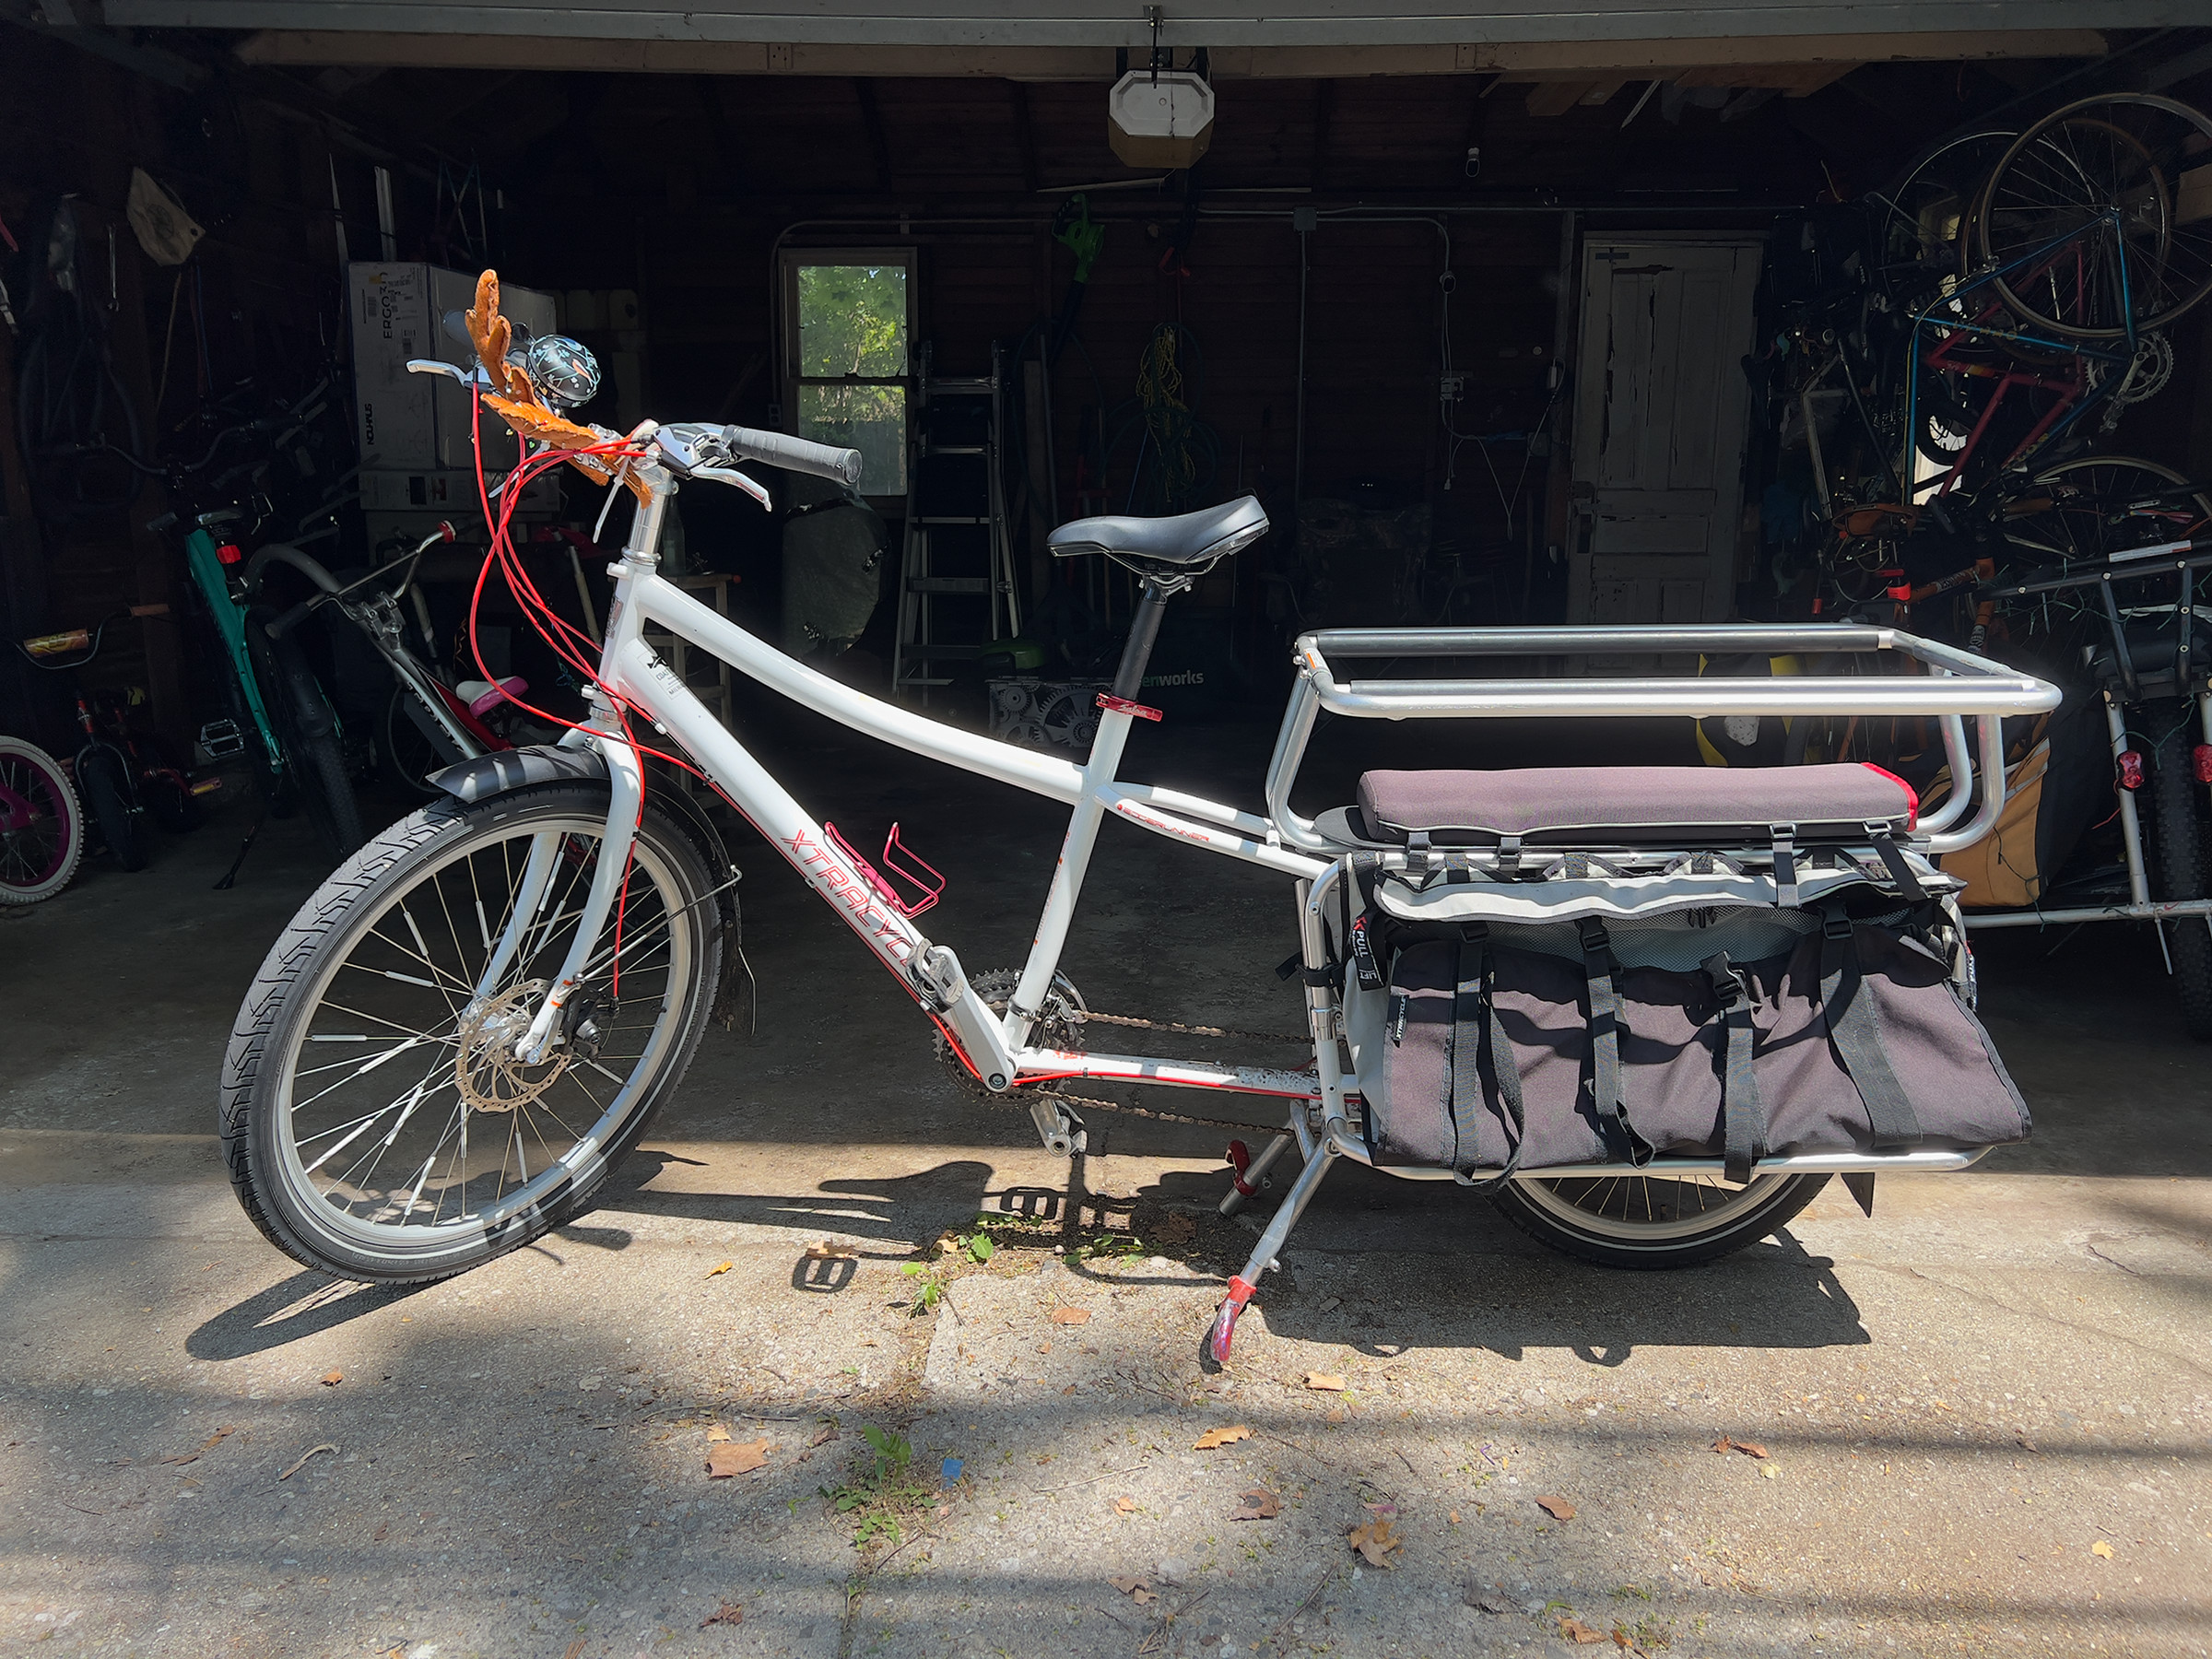 A picture of the Xtracycle Edgerunner without the e-bike motor on it, on its kickstand in front of an open garage. The bike is white with red lettering on the downtube, has a child-carrying modification in the back with a padded seat, and a large bag is visible hanging on the side.